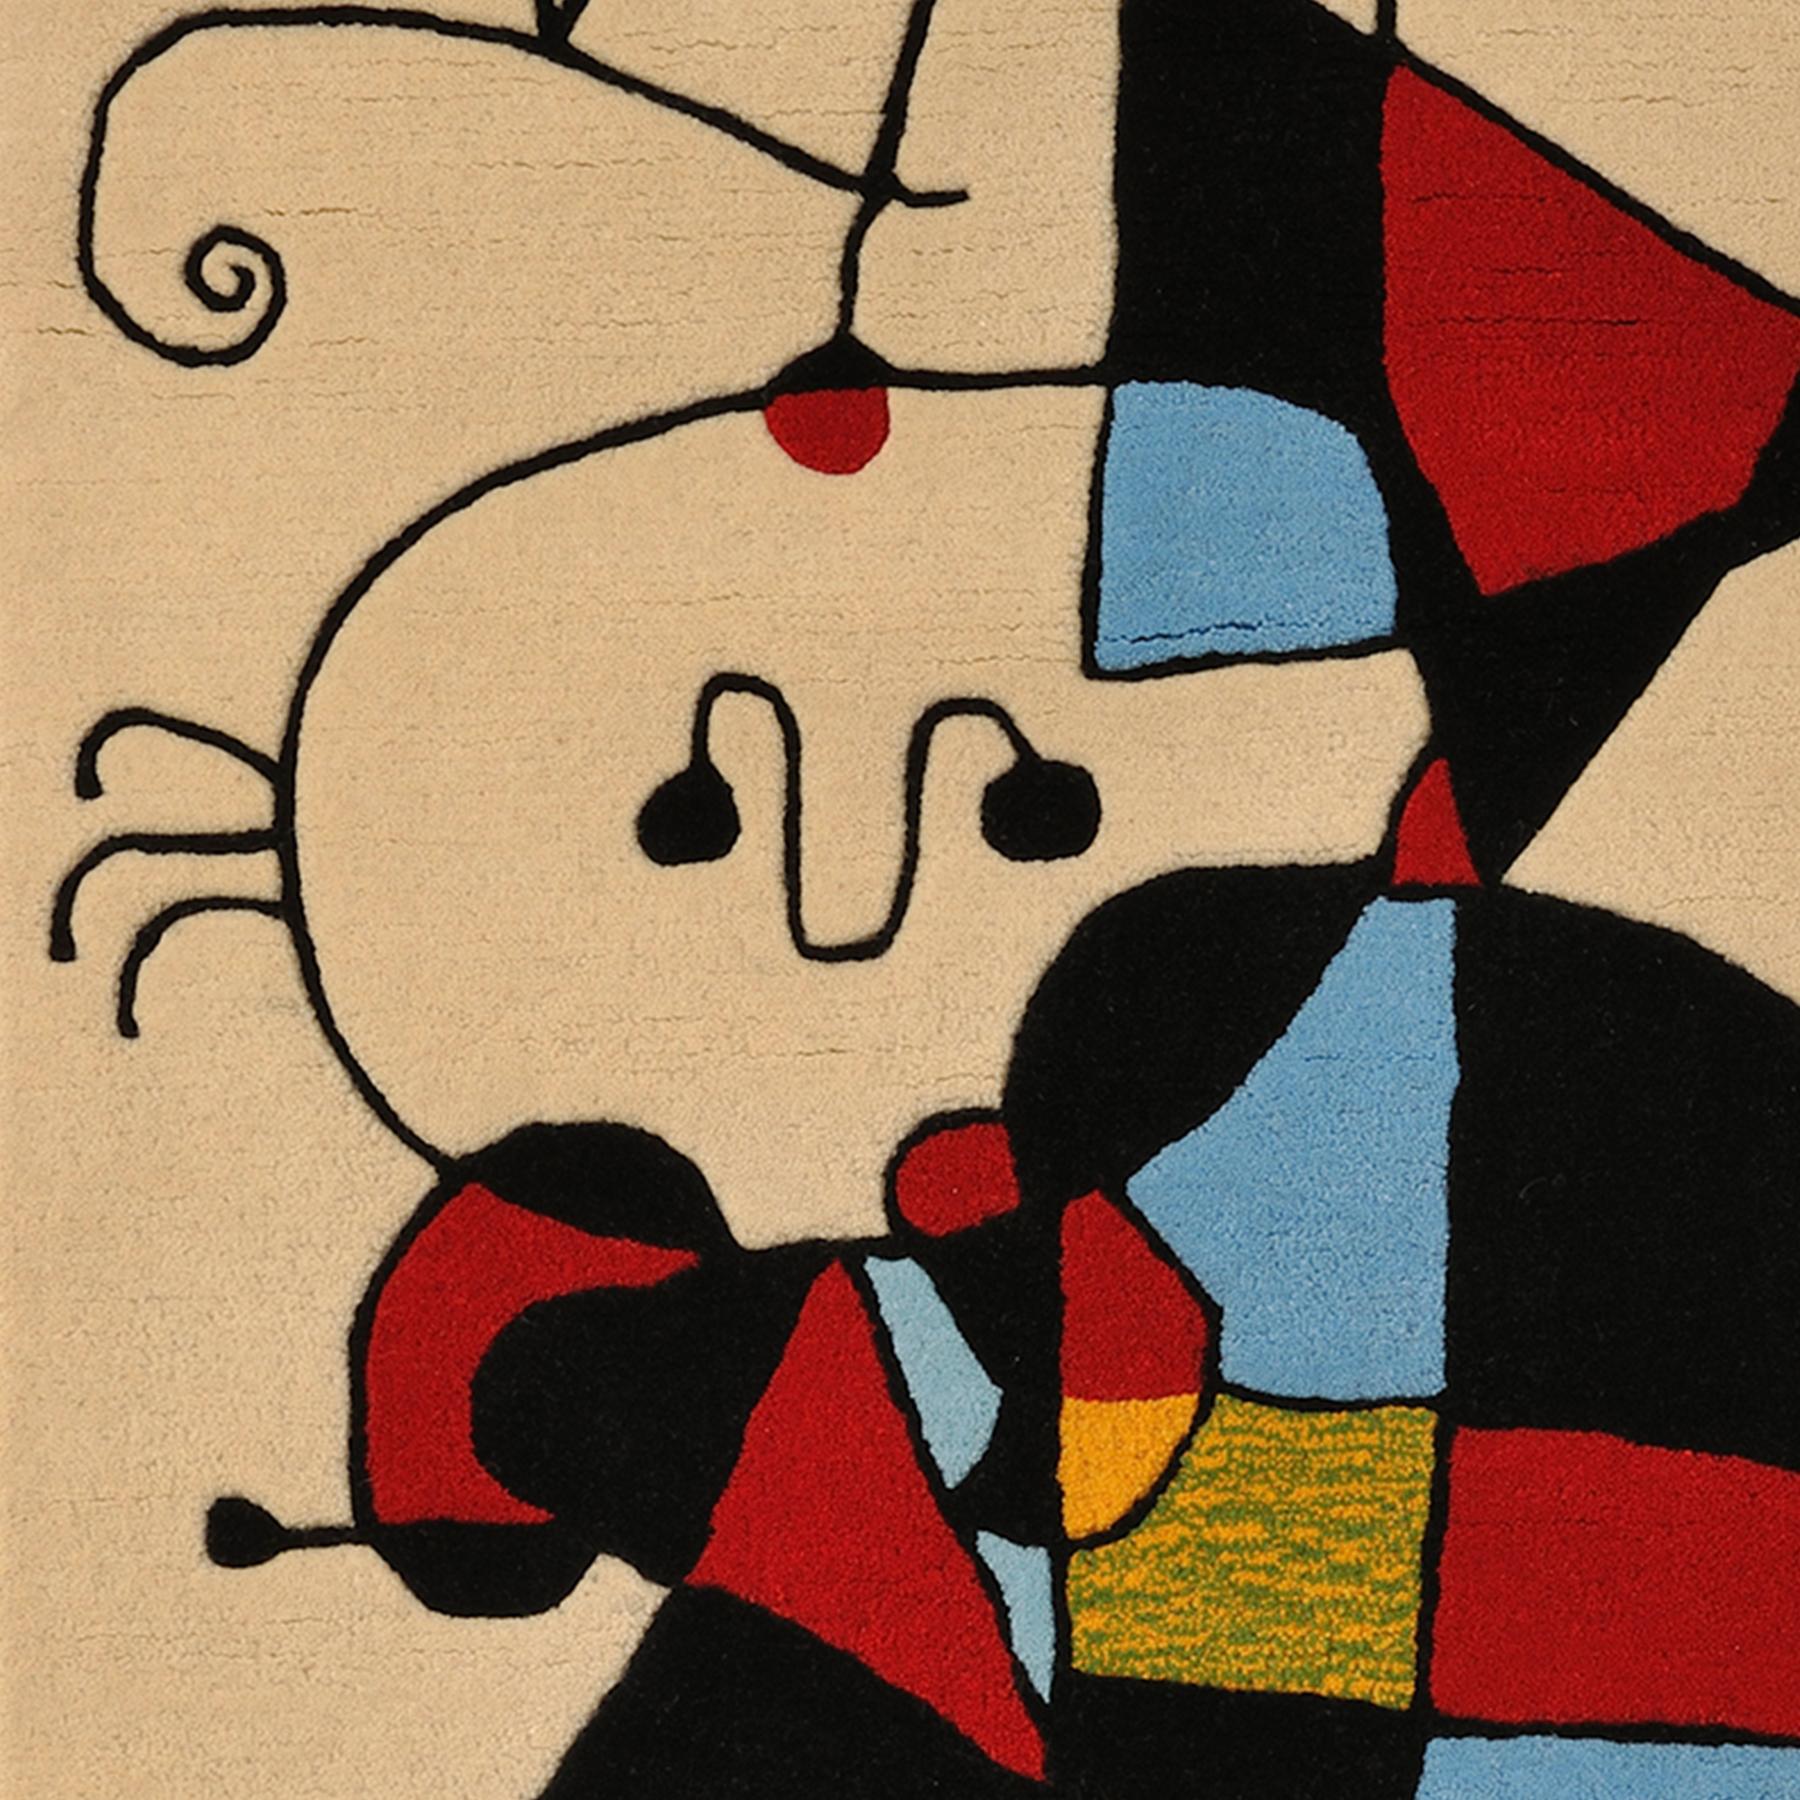 JOAN MIRÒ
Personnages et Chien devant le Soleil, 1949
Wool Tapestry
Signed on sticker label
In excellent condition
The artwork is offered unframed

This tapestry displays Mirós use of automated drawing and primary colors. Imaginative forms are